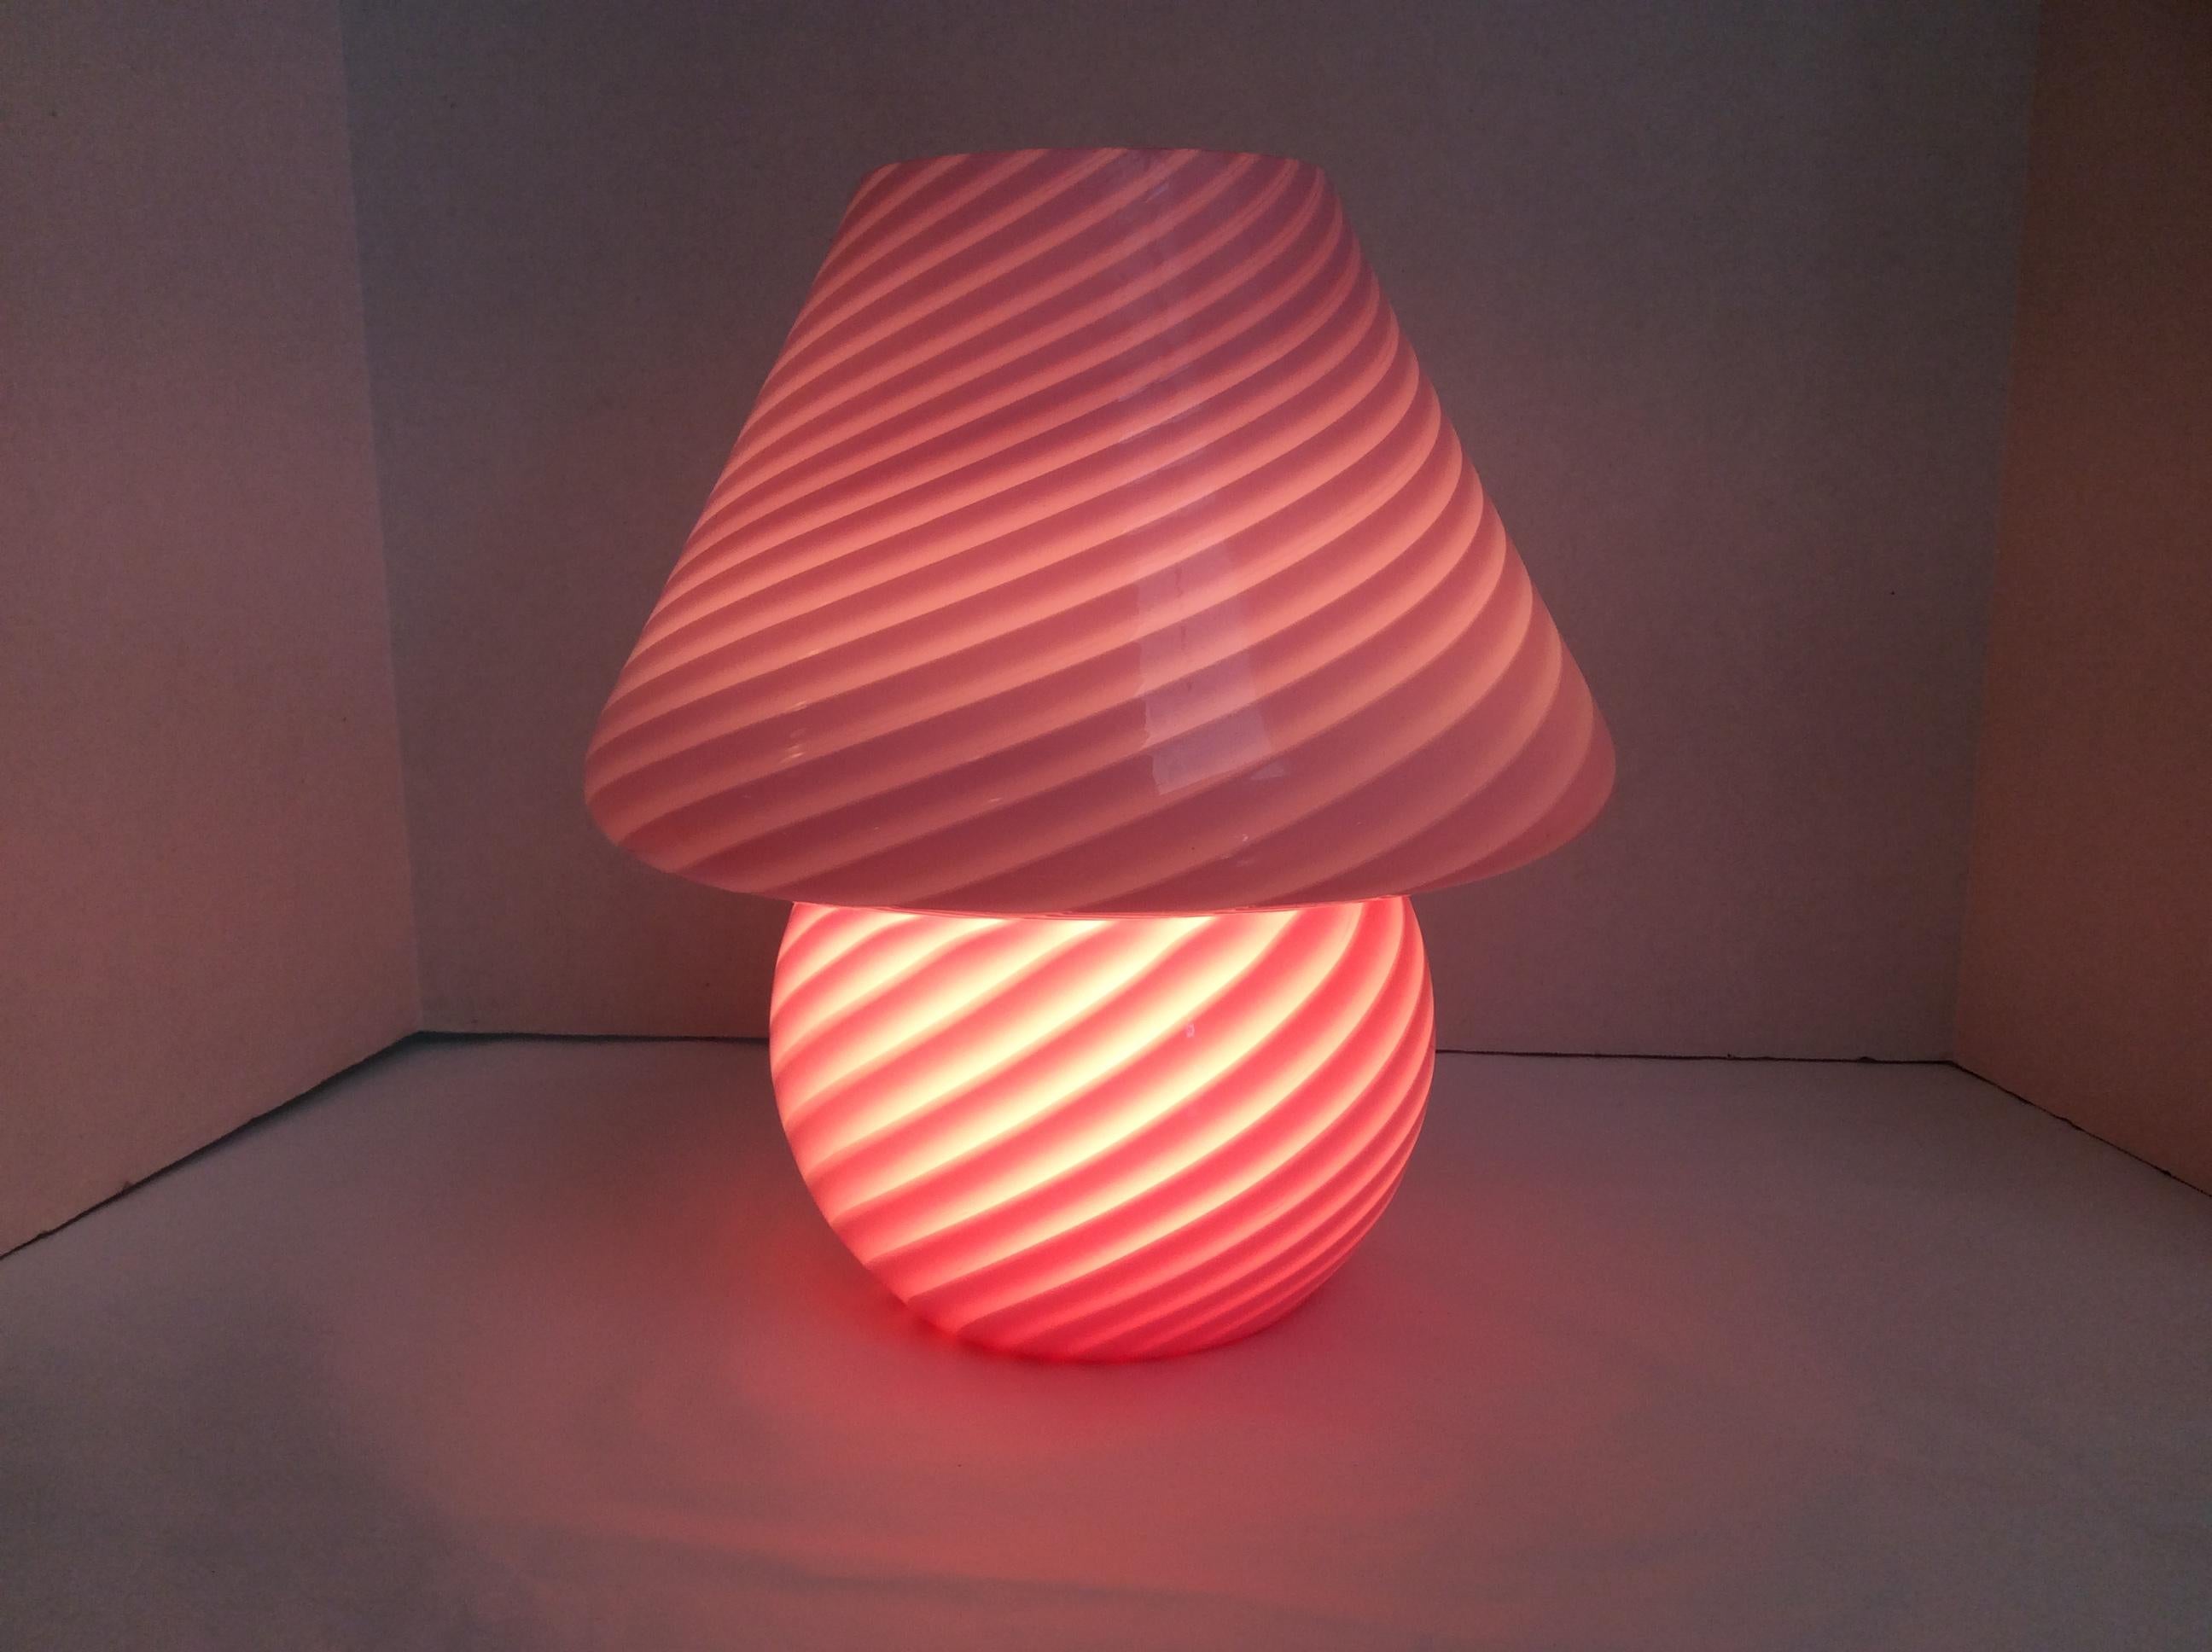 Italian Murano glass mushroom shaped table lamp. Pink Swirl design.
Vetri label on underside of shade,
Made in Italy, circa 1960s.
Measures: 10.5 inches high
4 inch opening at top of shade
9.5 inch wide at widest.

  